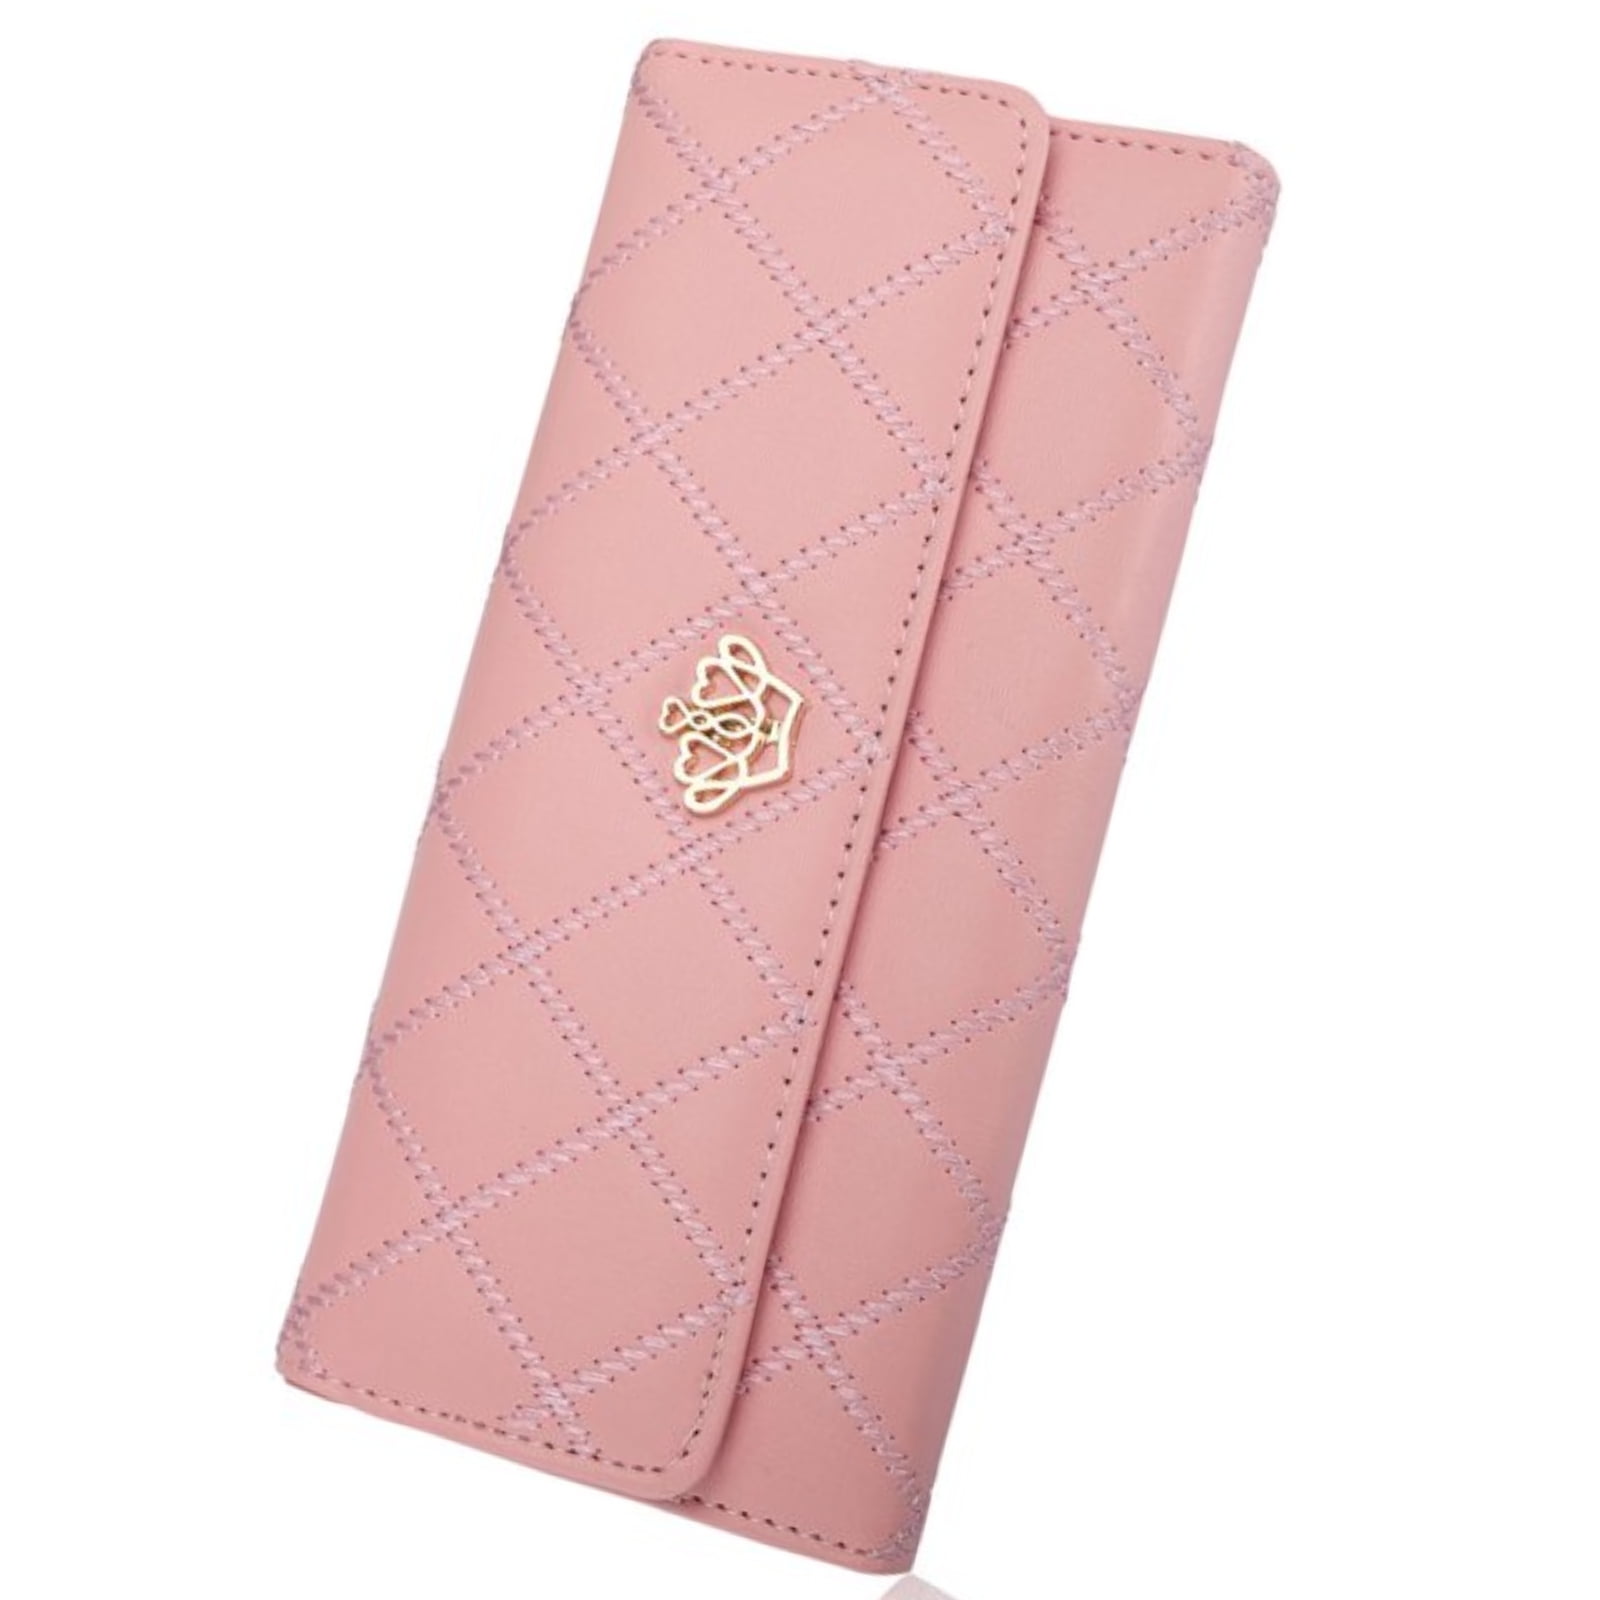 Womens Wallet Soft Leather Ladies Clutch Trifold Long Multi Card Holder Organizer 